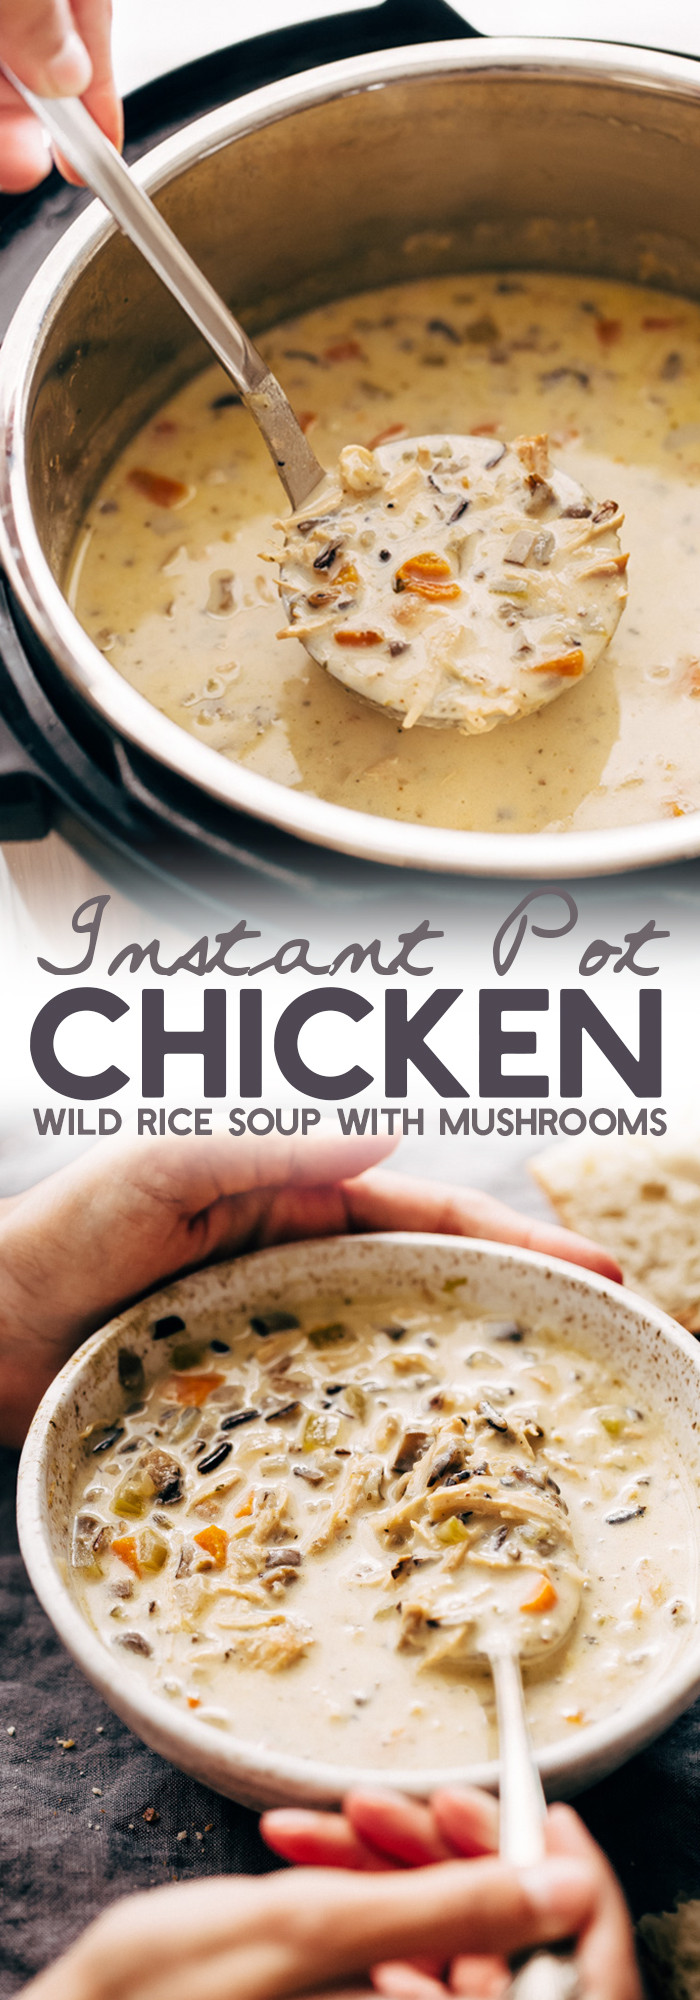 Instant Pot Chicken Rice Soup
 Instant Pot Chicken Wild Rice Soup Recipe